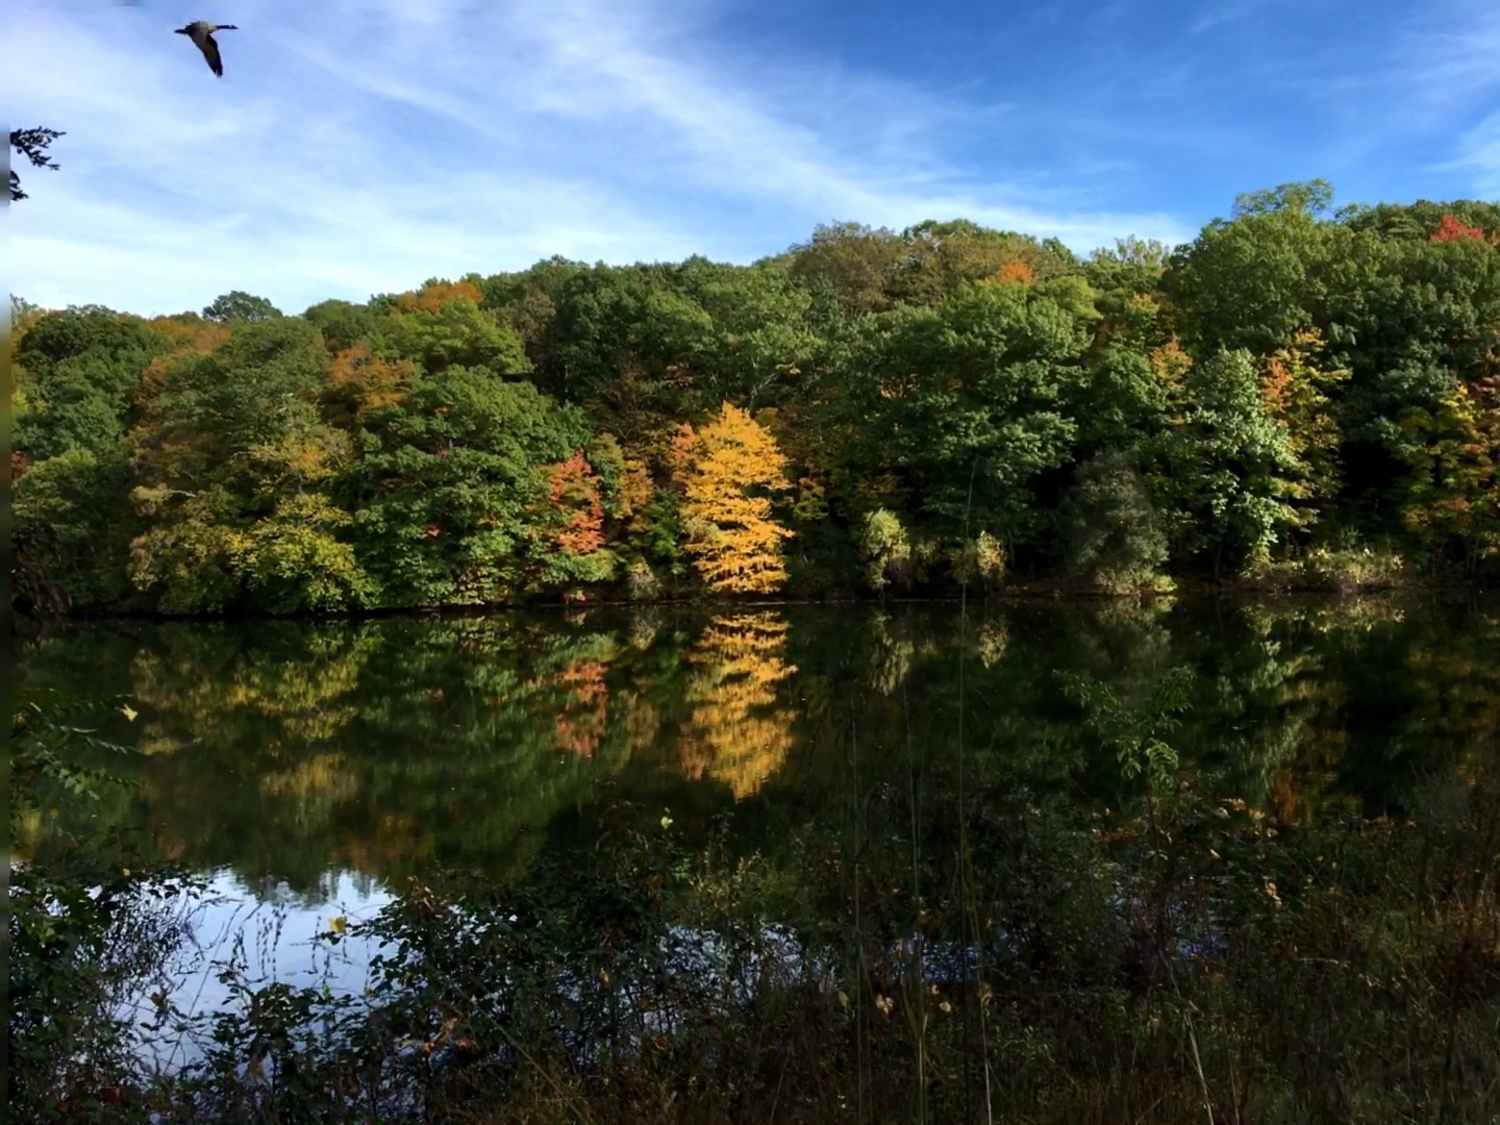 Leaves changing colors at the Rockefeller State Park Preserve in Pleasantville, New York, in October 2017.   DREW BUDD